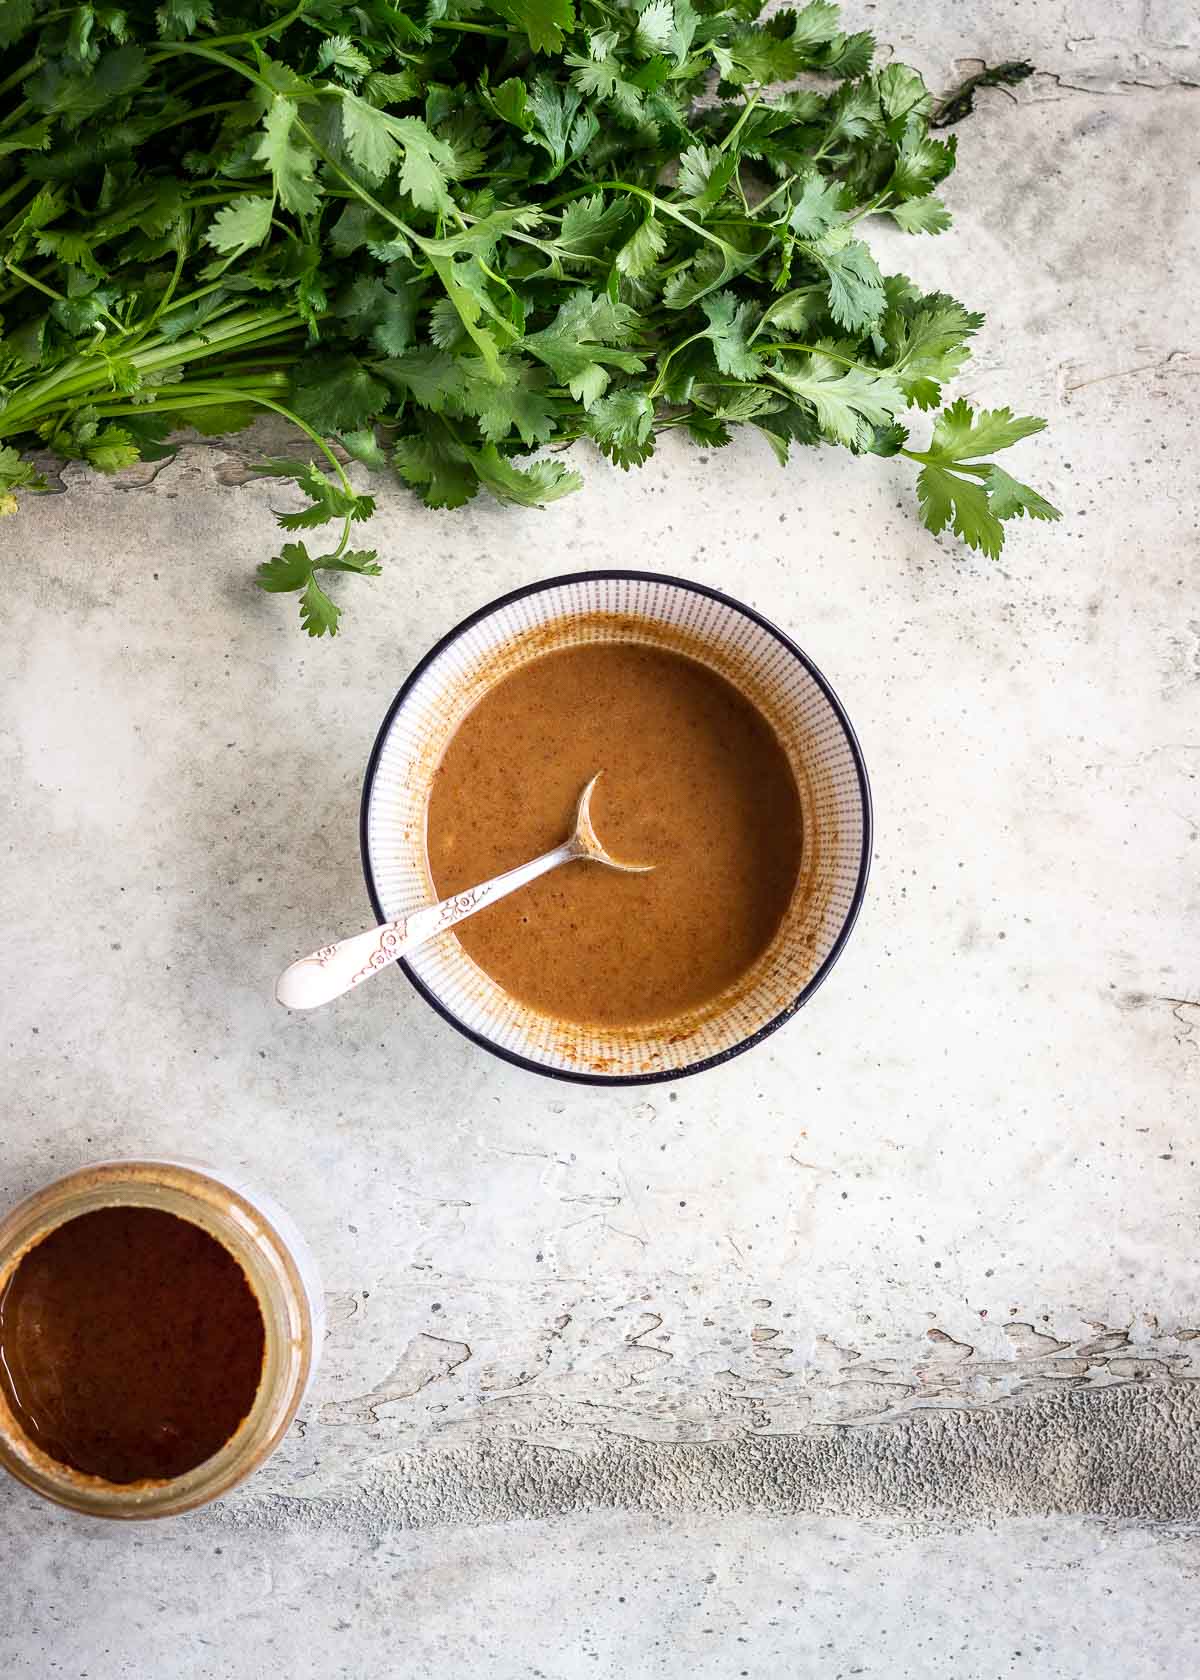 Almond butter sauce in a small bowl with a spoon, with some cilantro nearby.